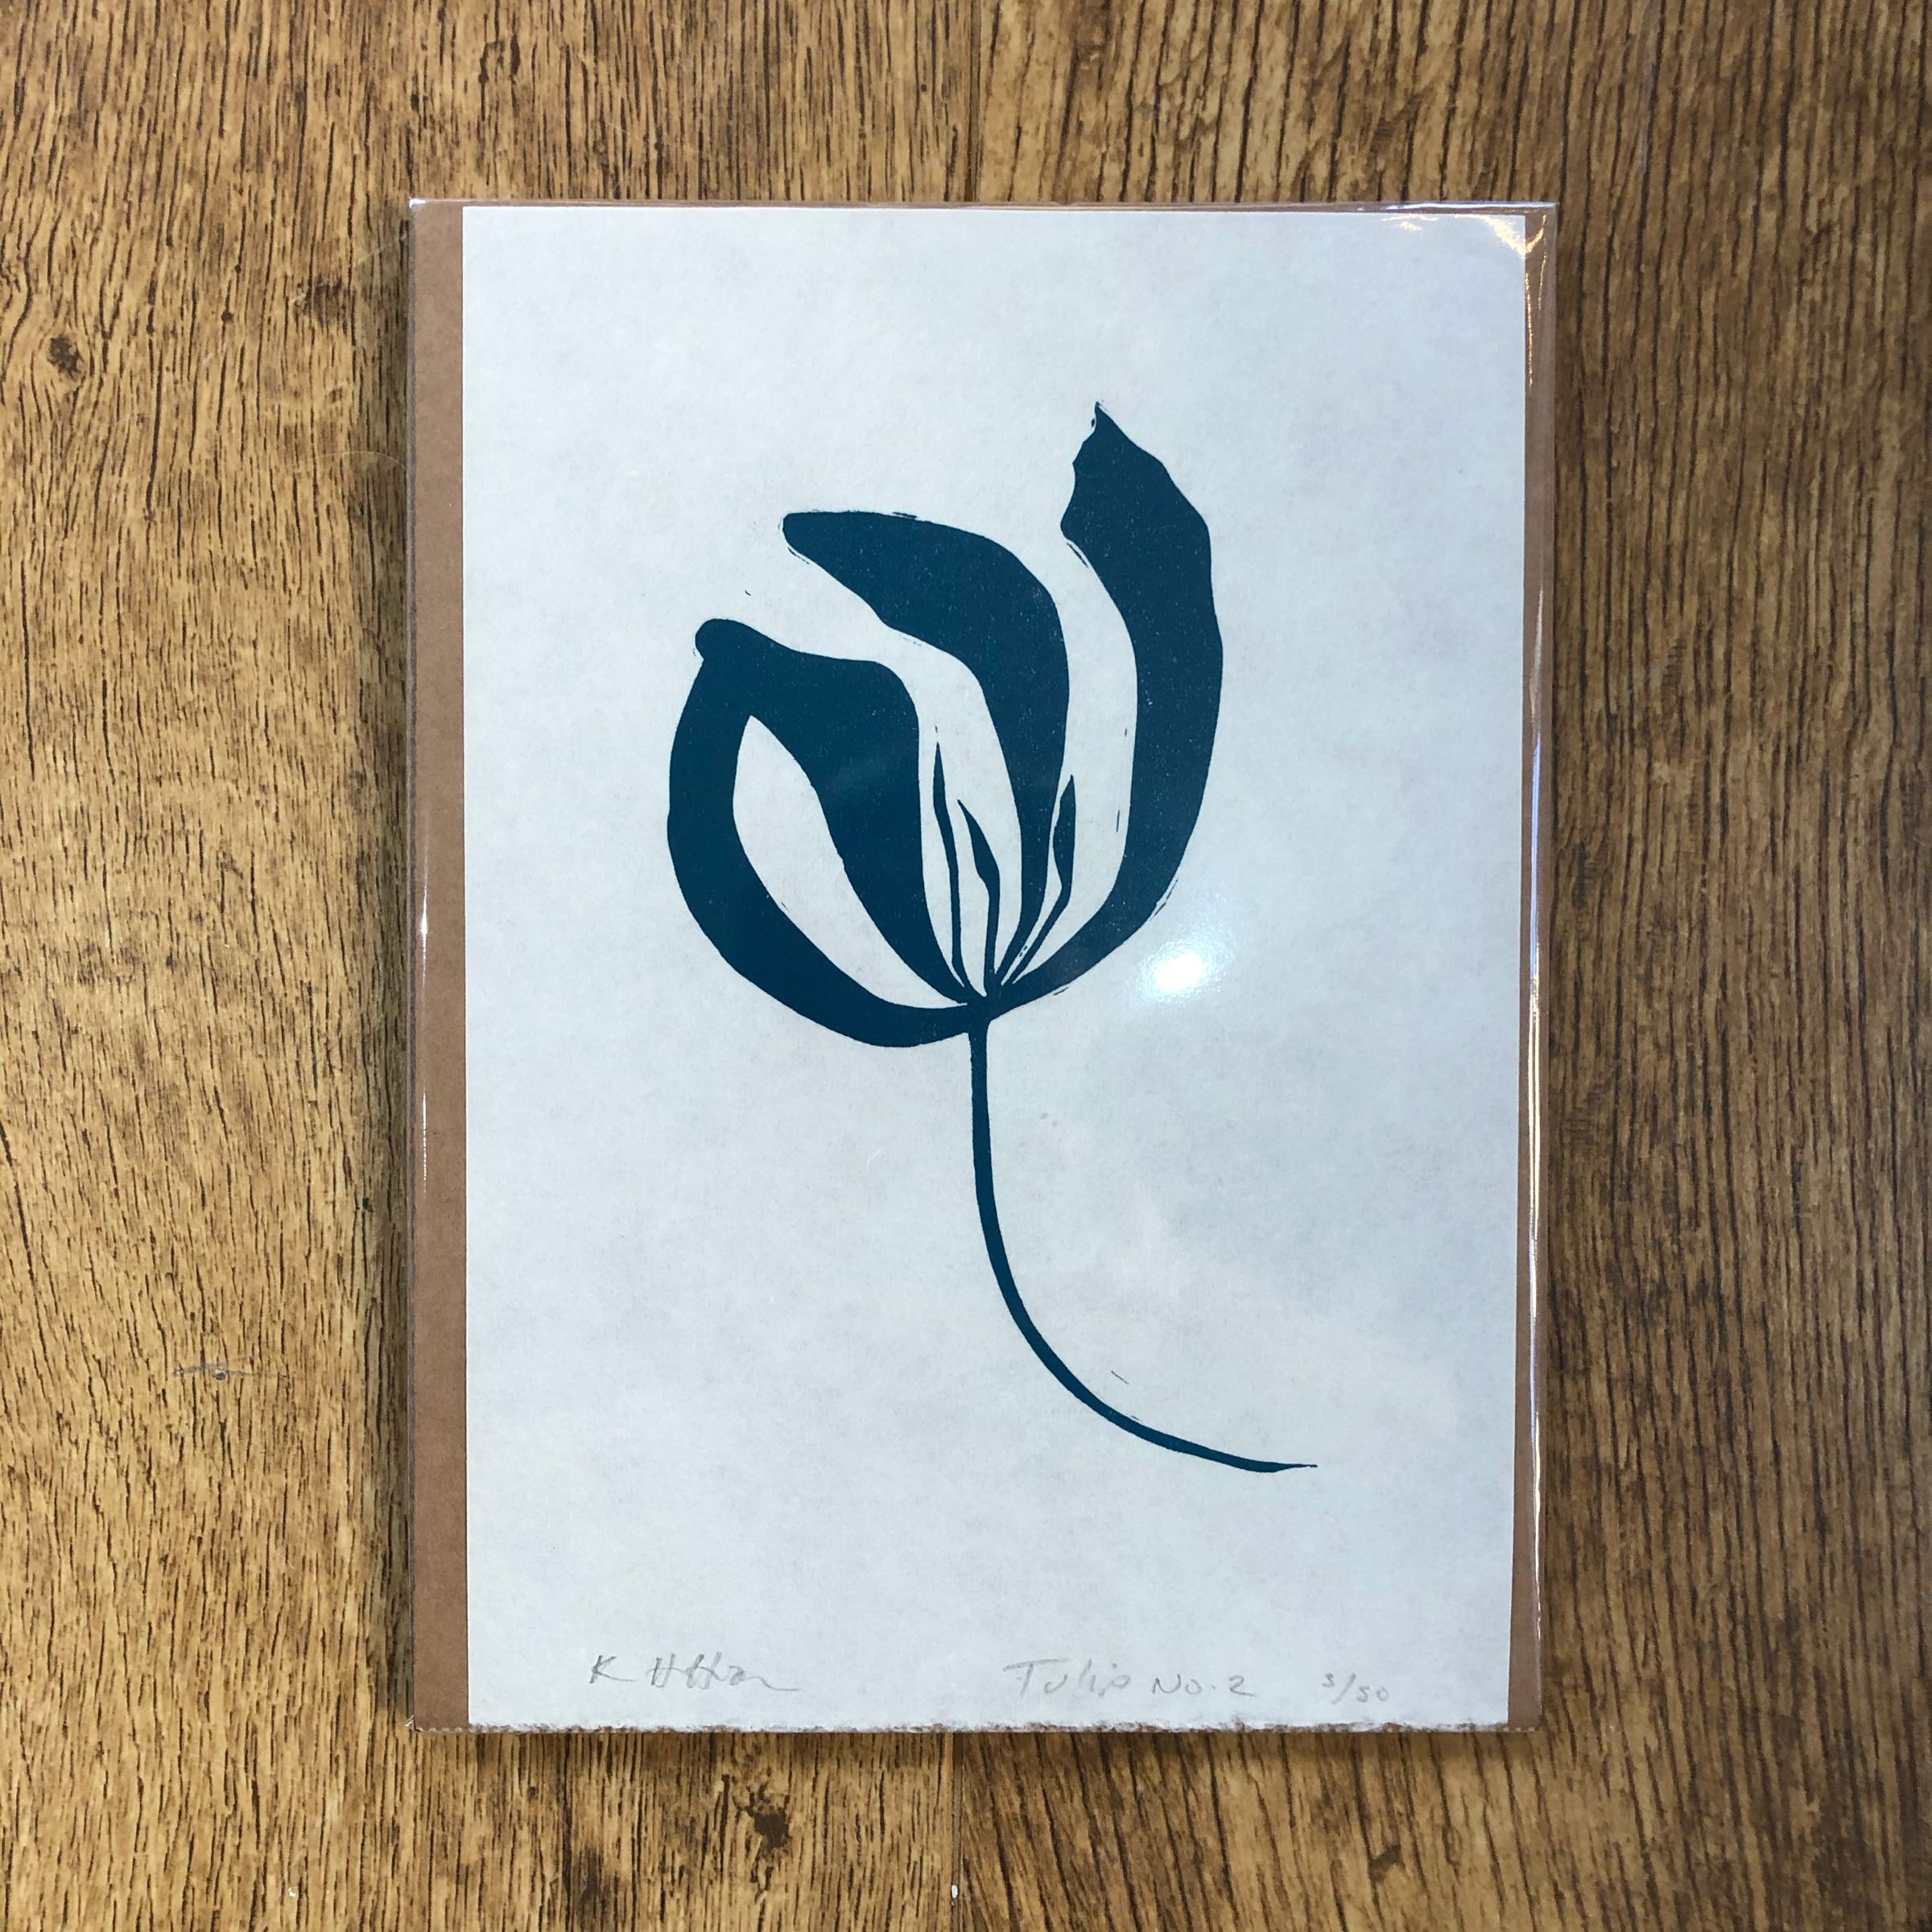 Tulip No. 2 single study lino print in Teal by Kathy Hutton